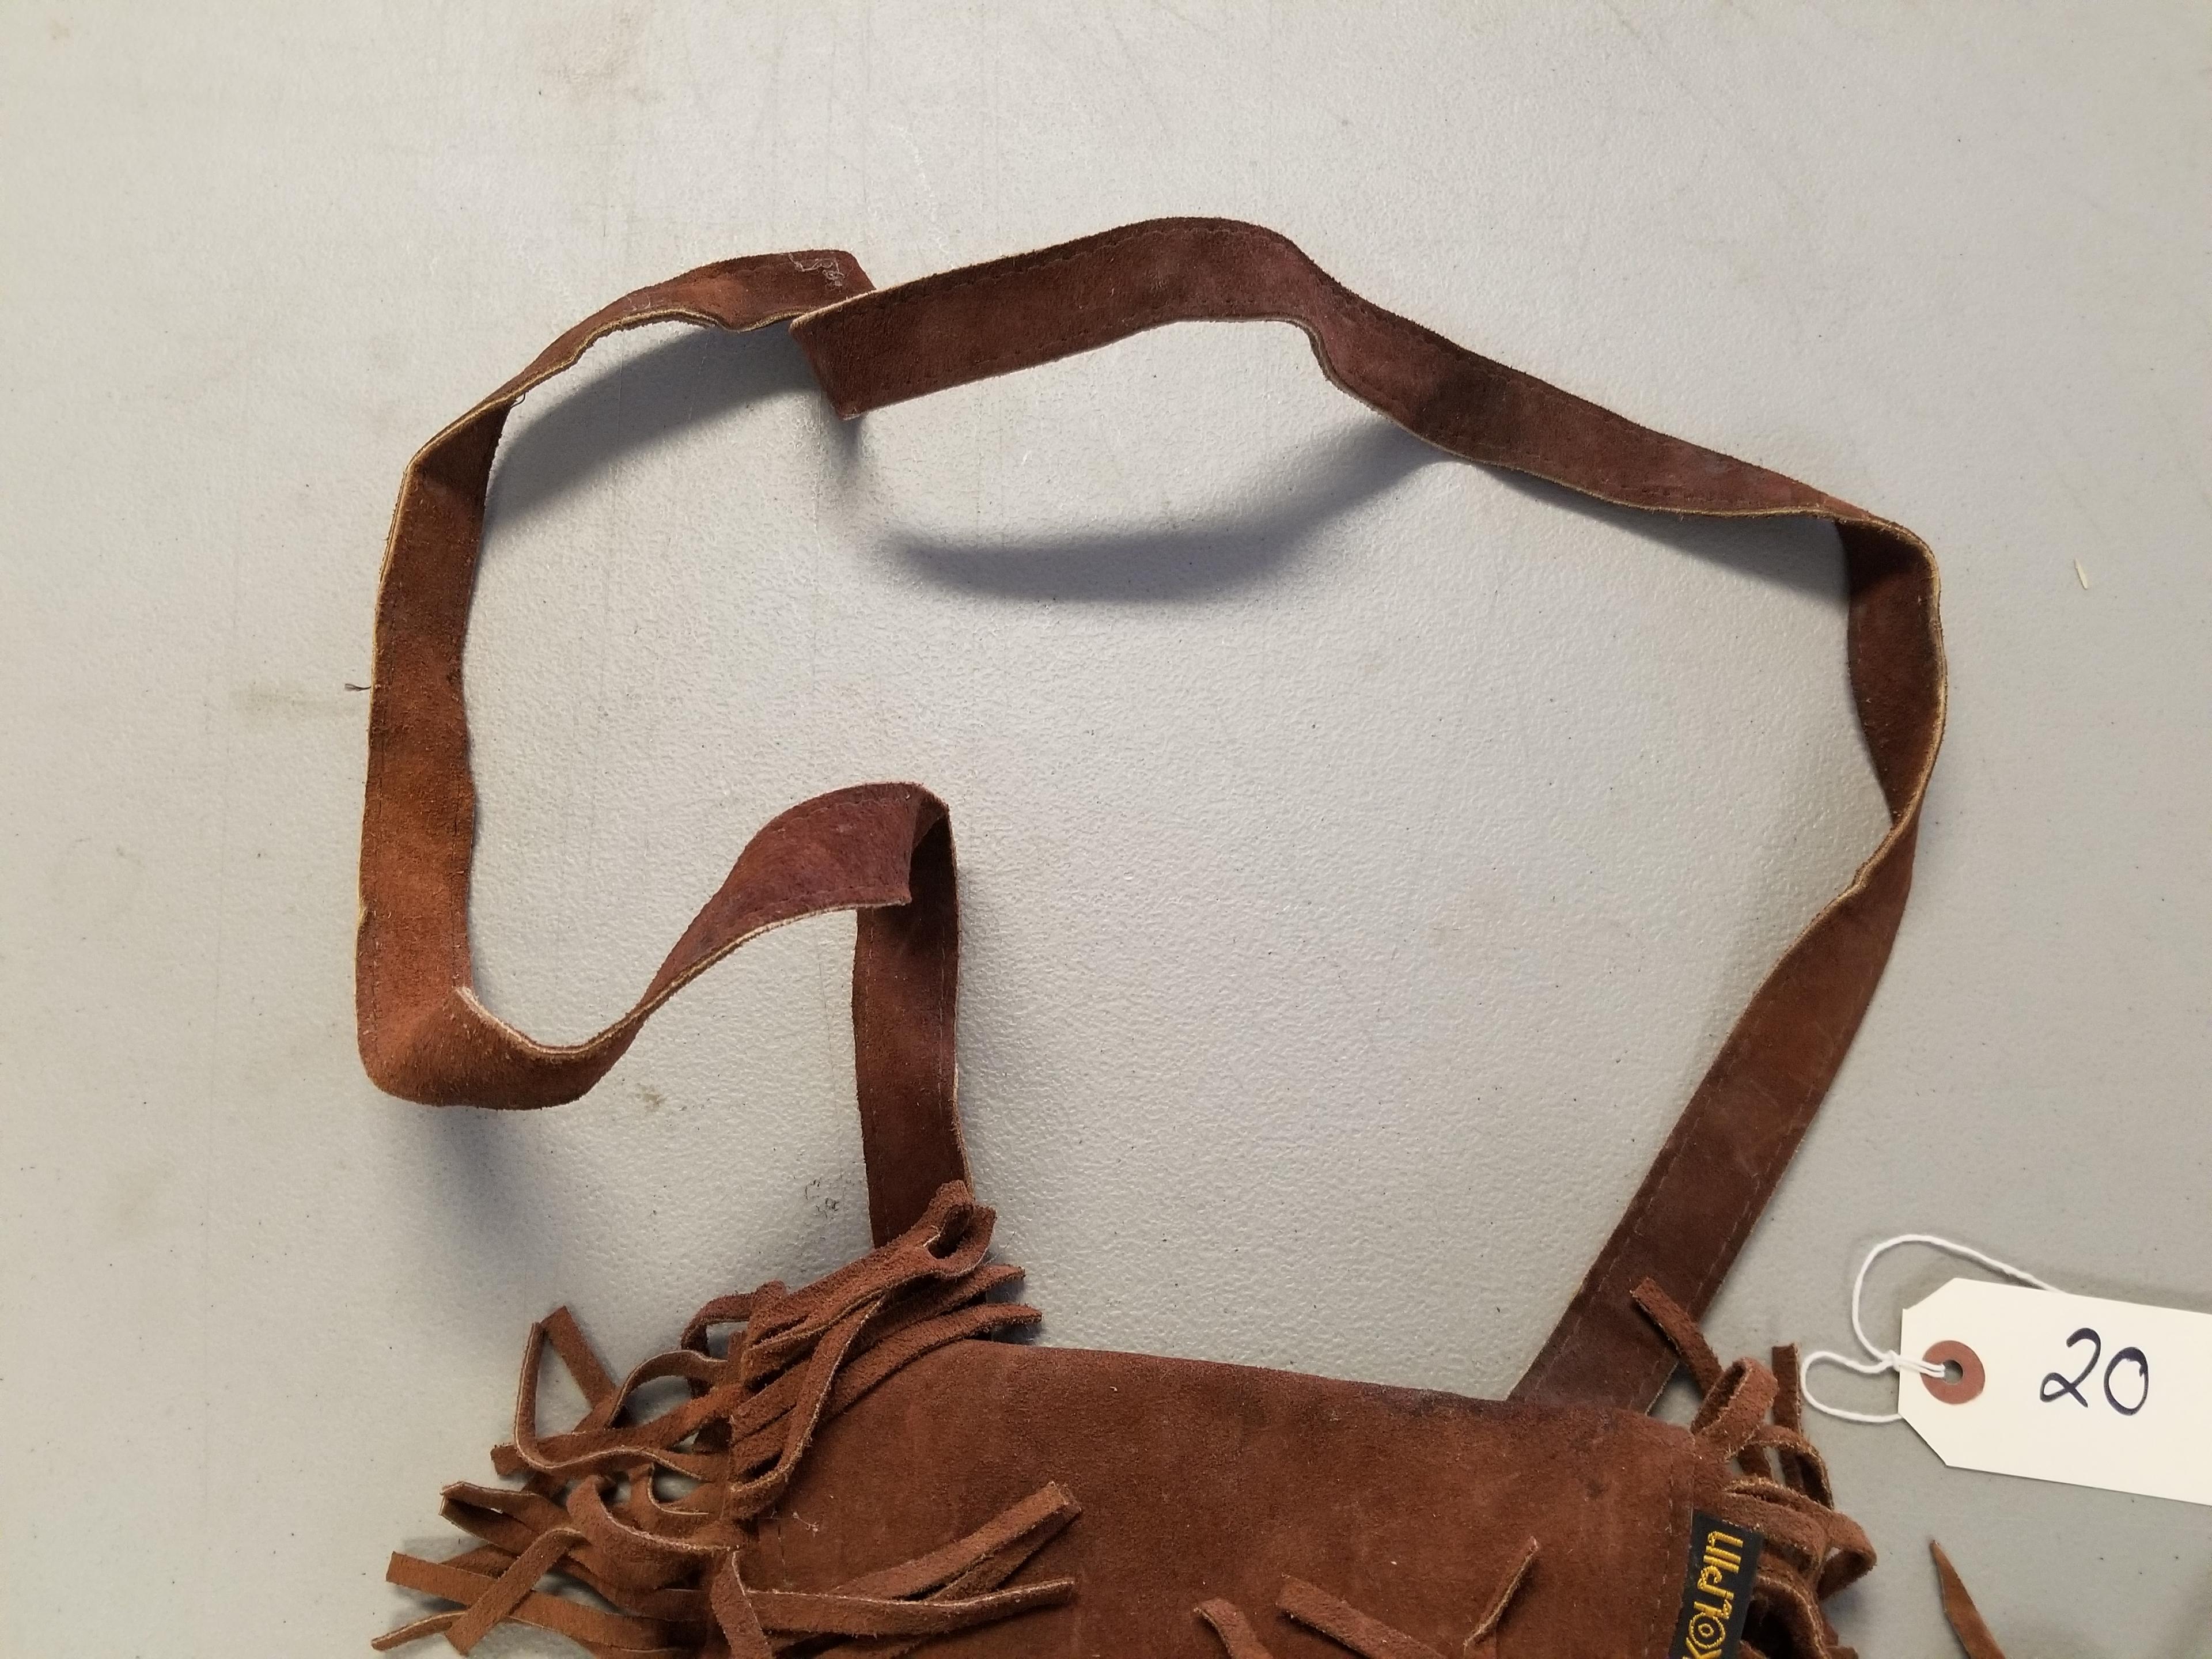 (2) Vintage Leather Musket Ball Pouches